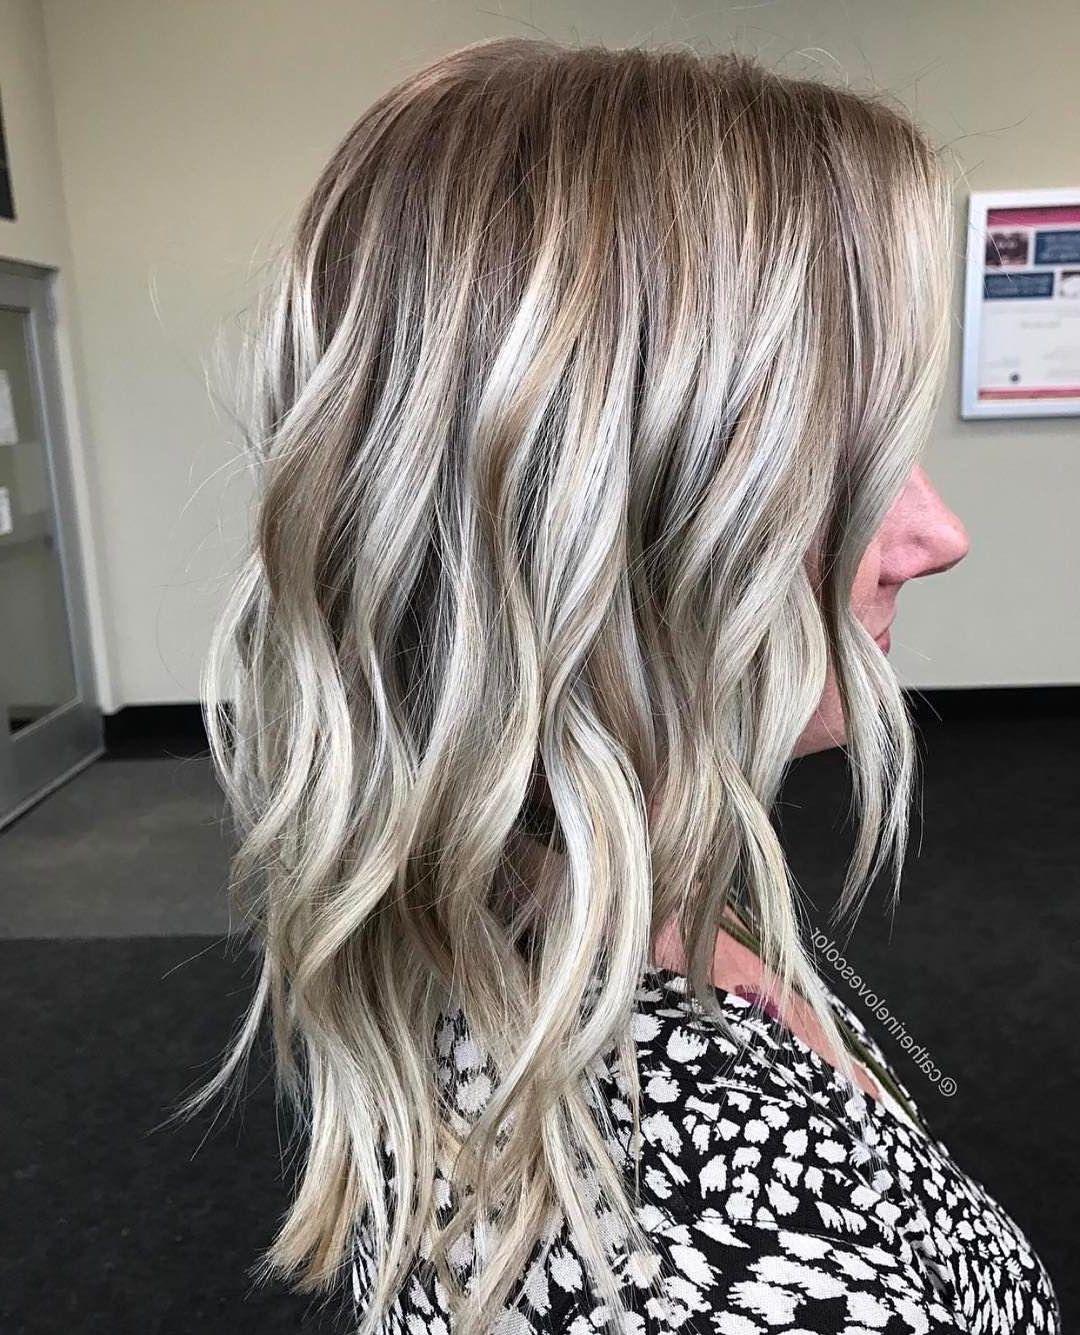 20 Adorable Ash Blonde Hairstyles To Try: Hair Color Ideas 2019 Throughout Voluminous Two Tone Haircuts (View 15 of 20)